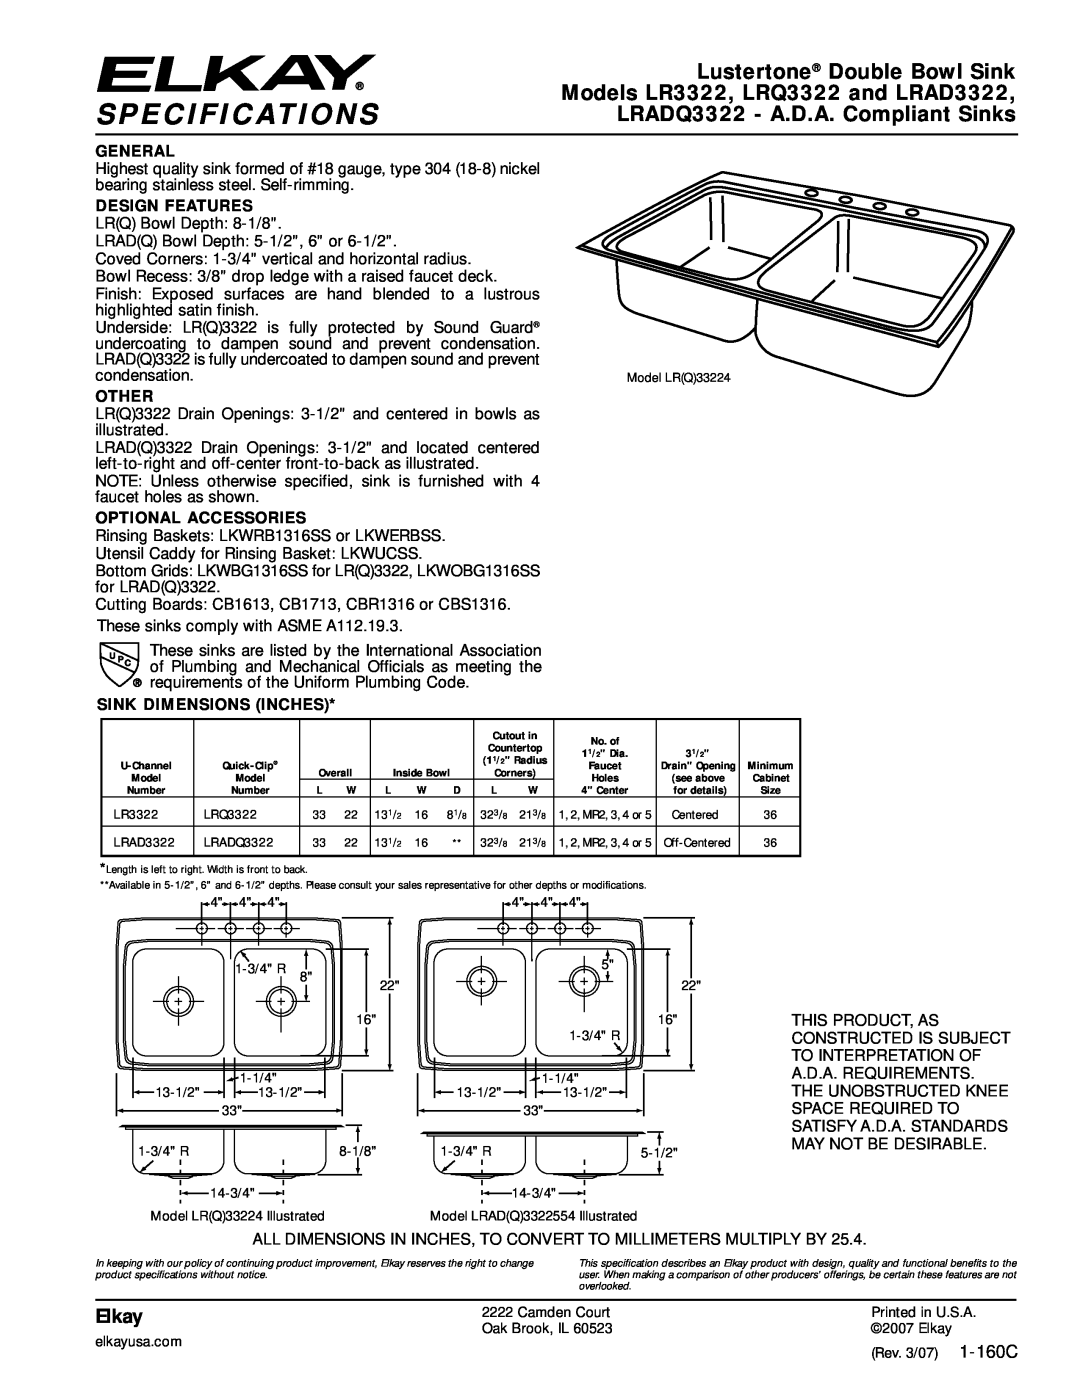 Elkay LRADQ3322 specifications Specifications, Lustertone Double Bowl Sink, Models LR3322, LRQ3322 and LRAD3322, Elkay 